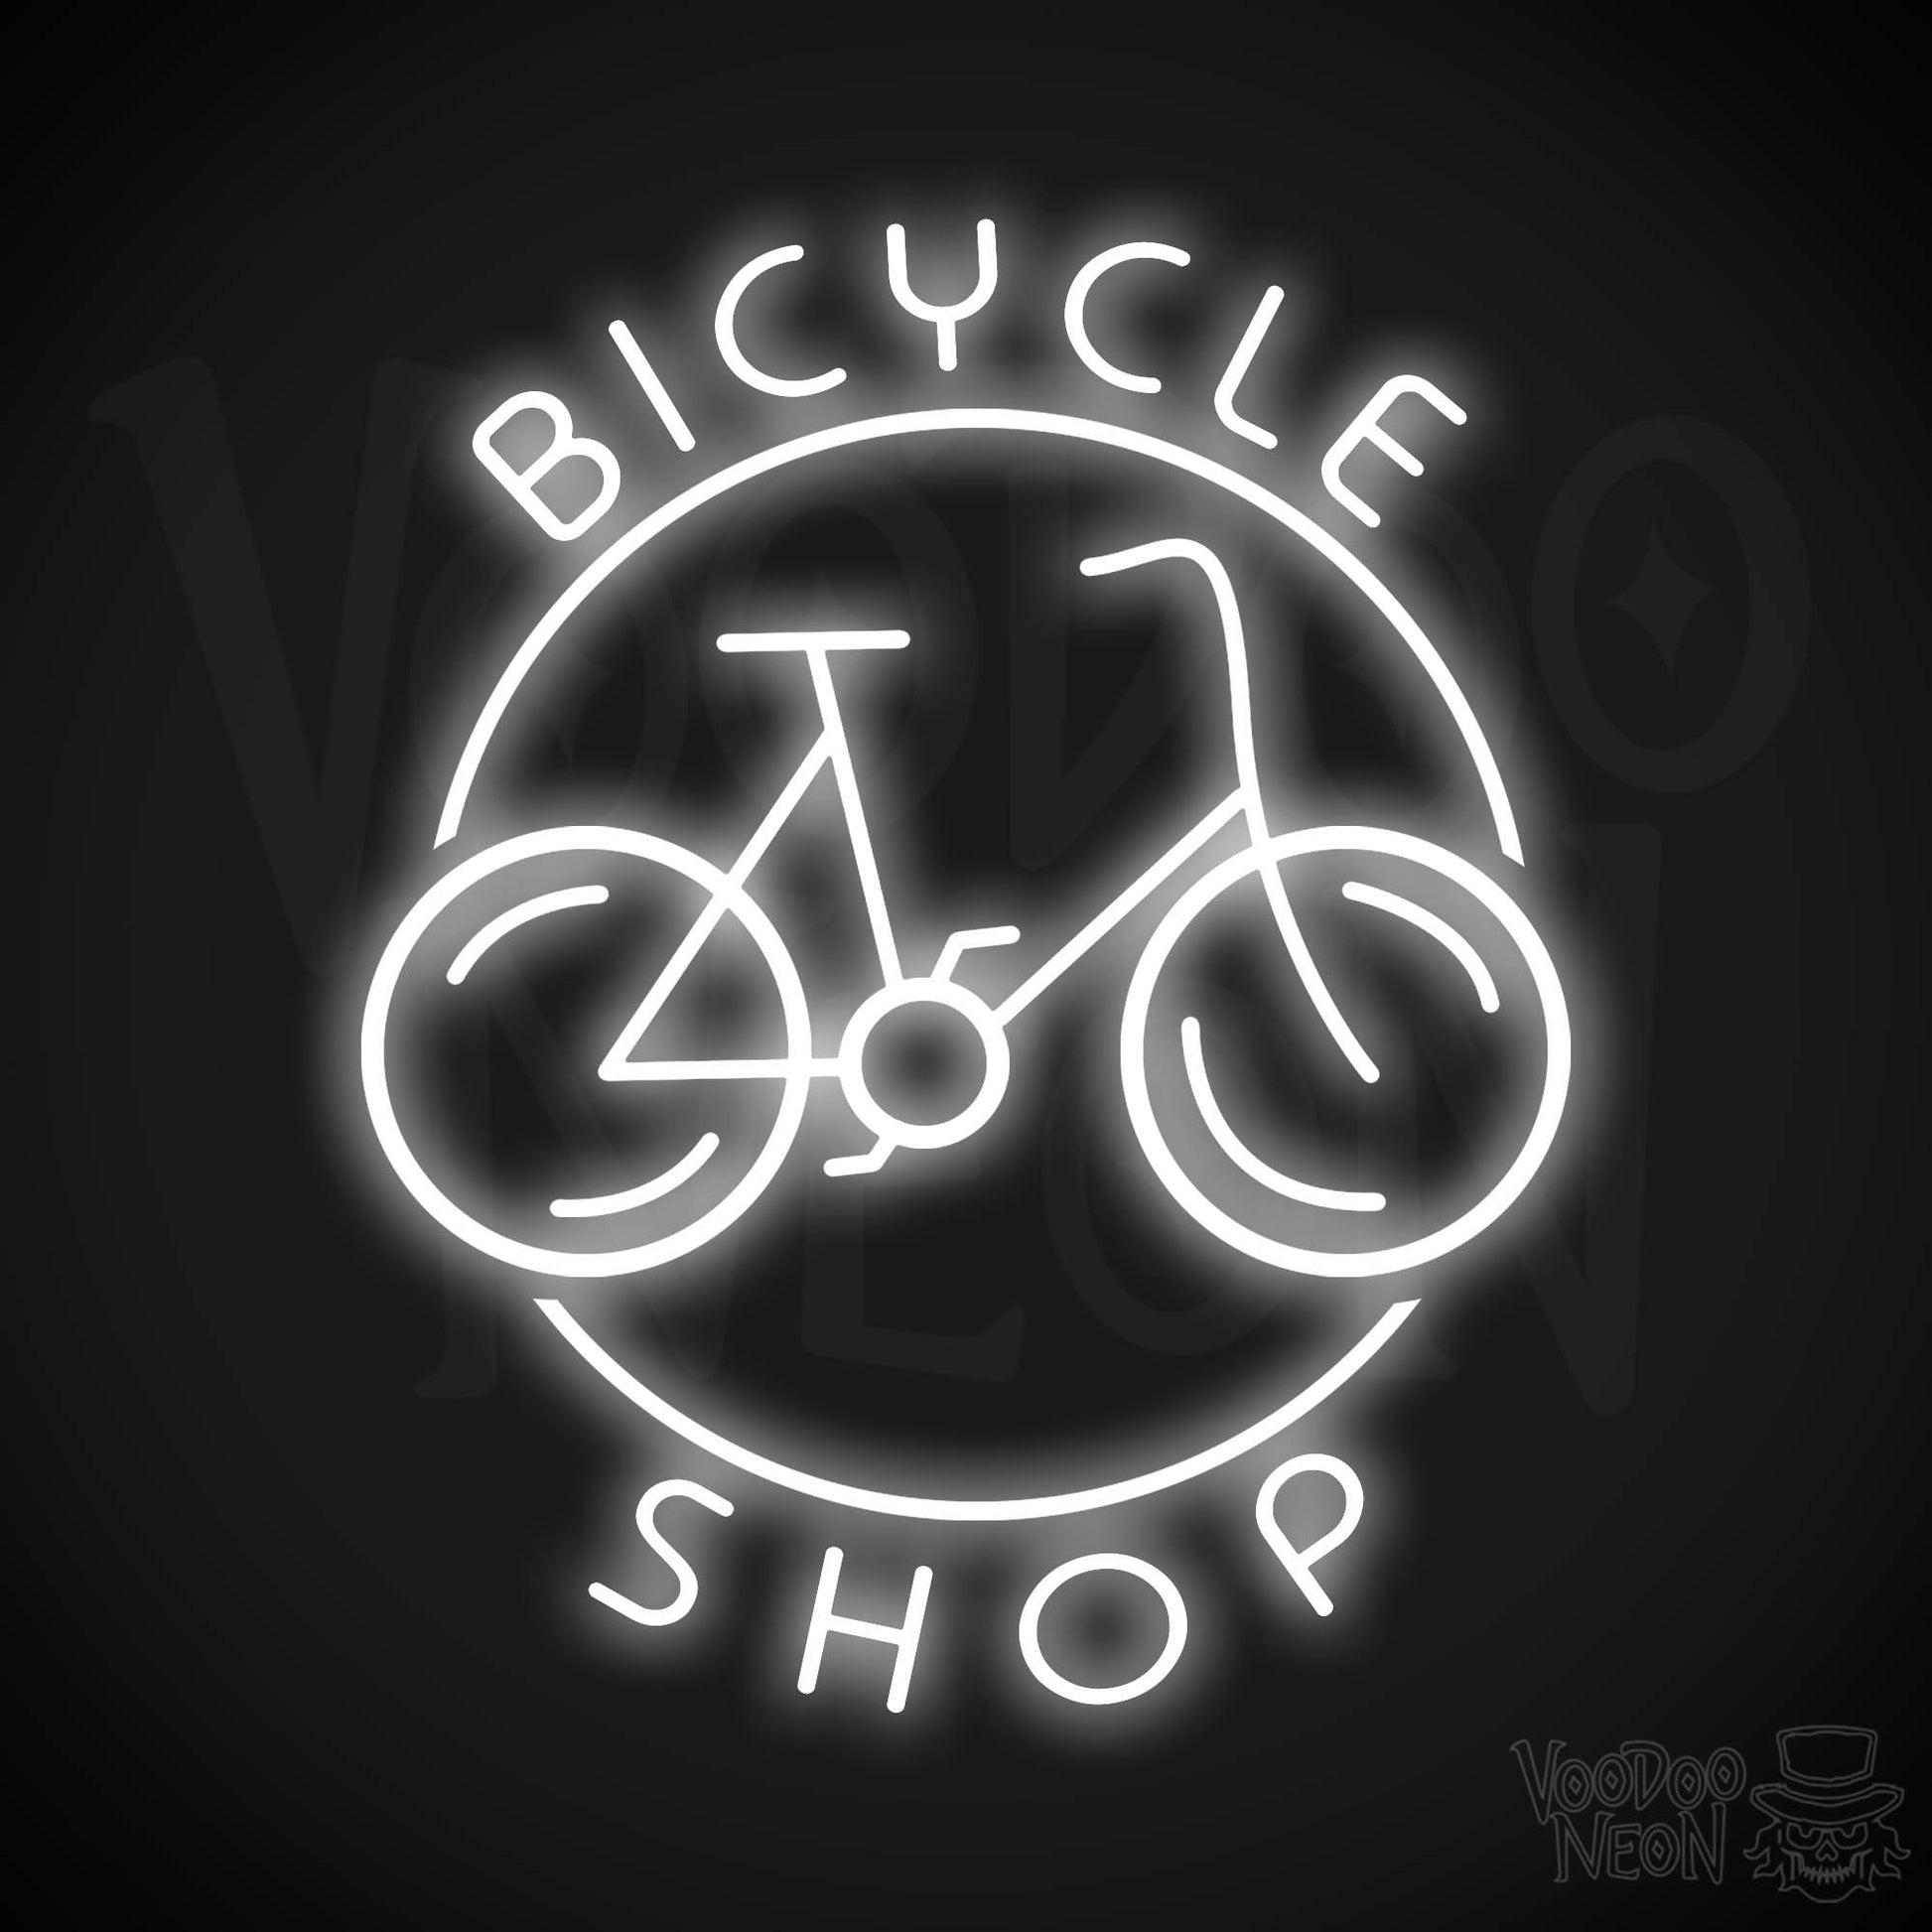 Bicycle Shop LED Neon - White